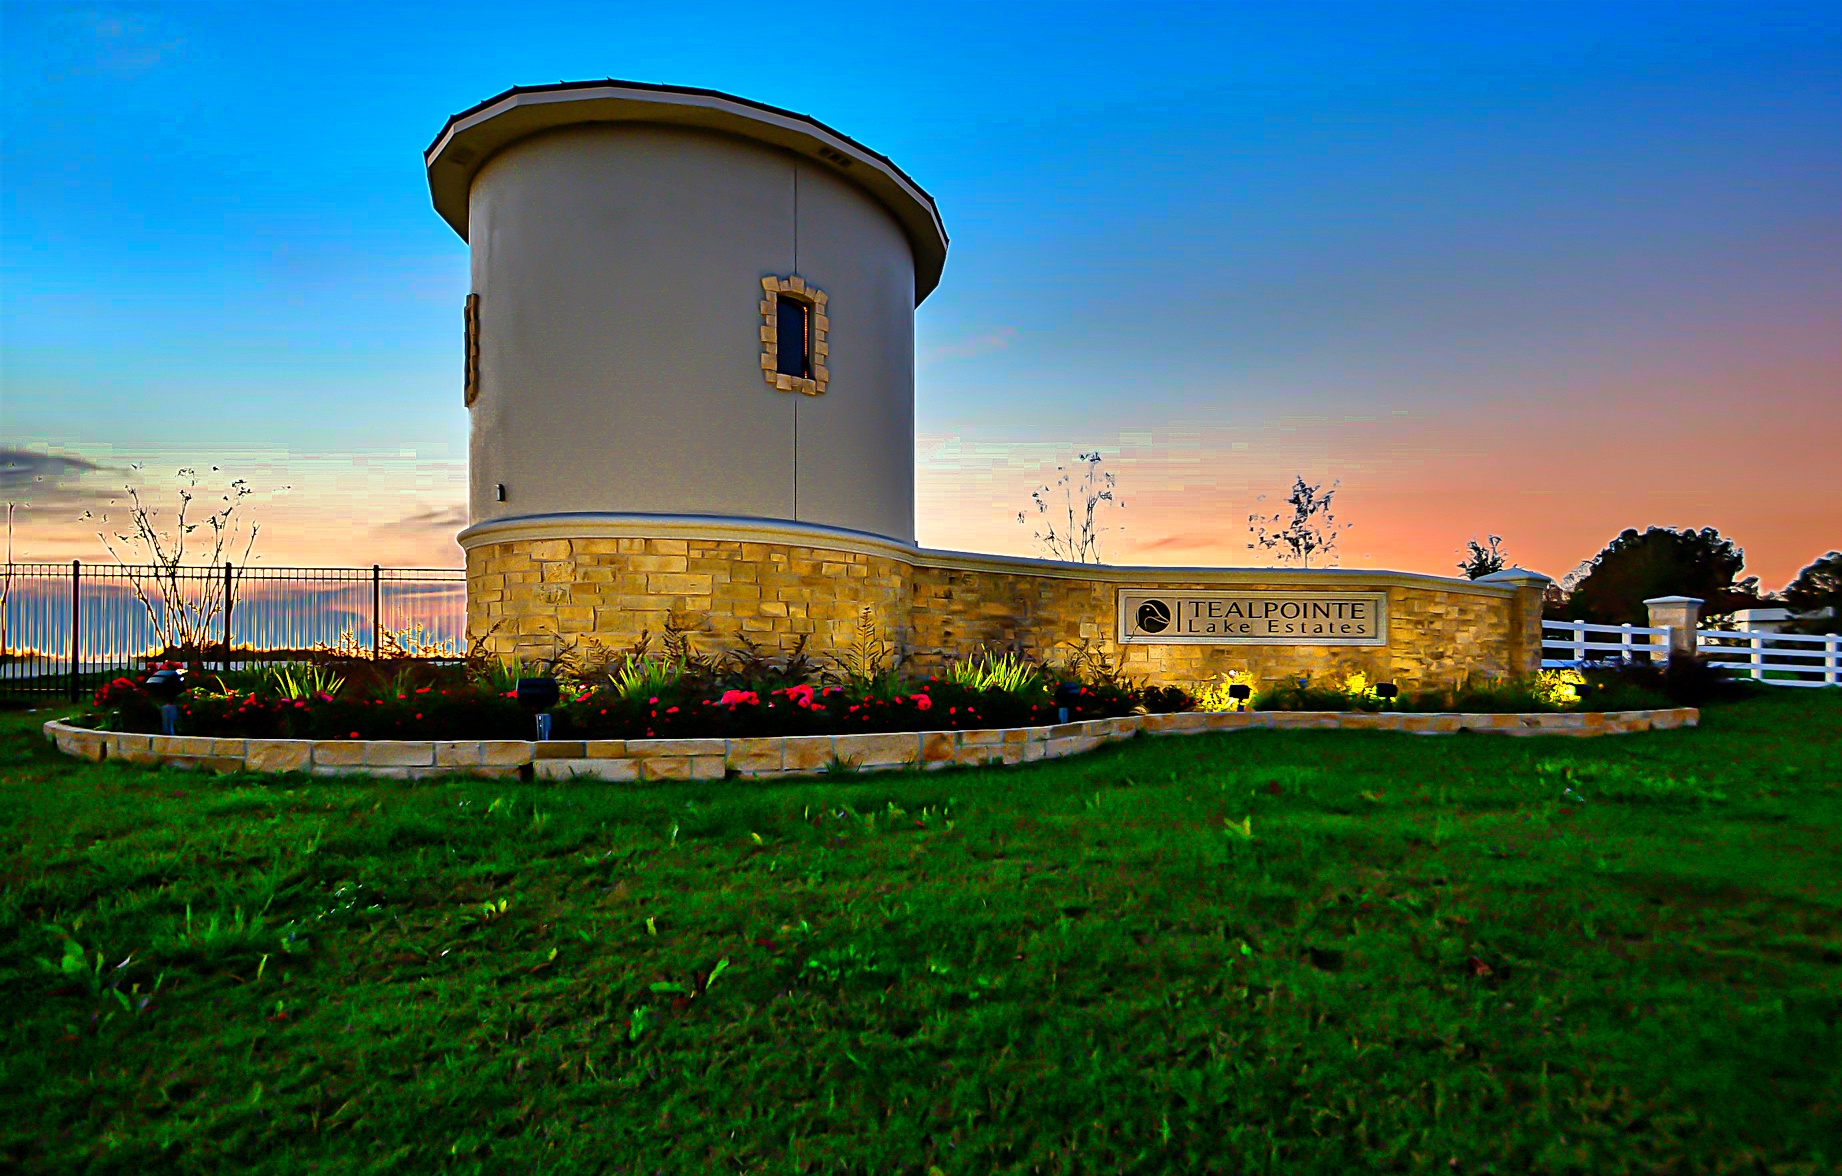 Tealpointe Lake Estates - One of the Best Communities to Live in Tomball